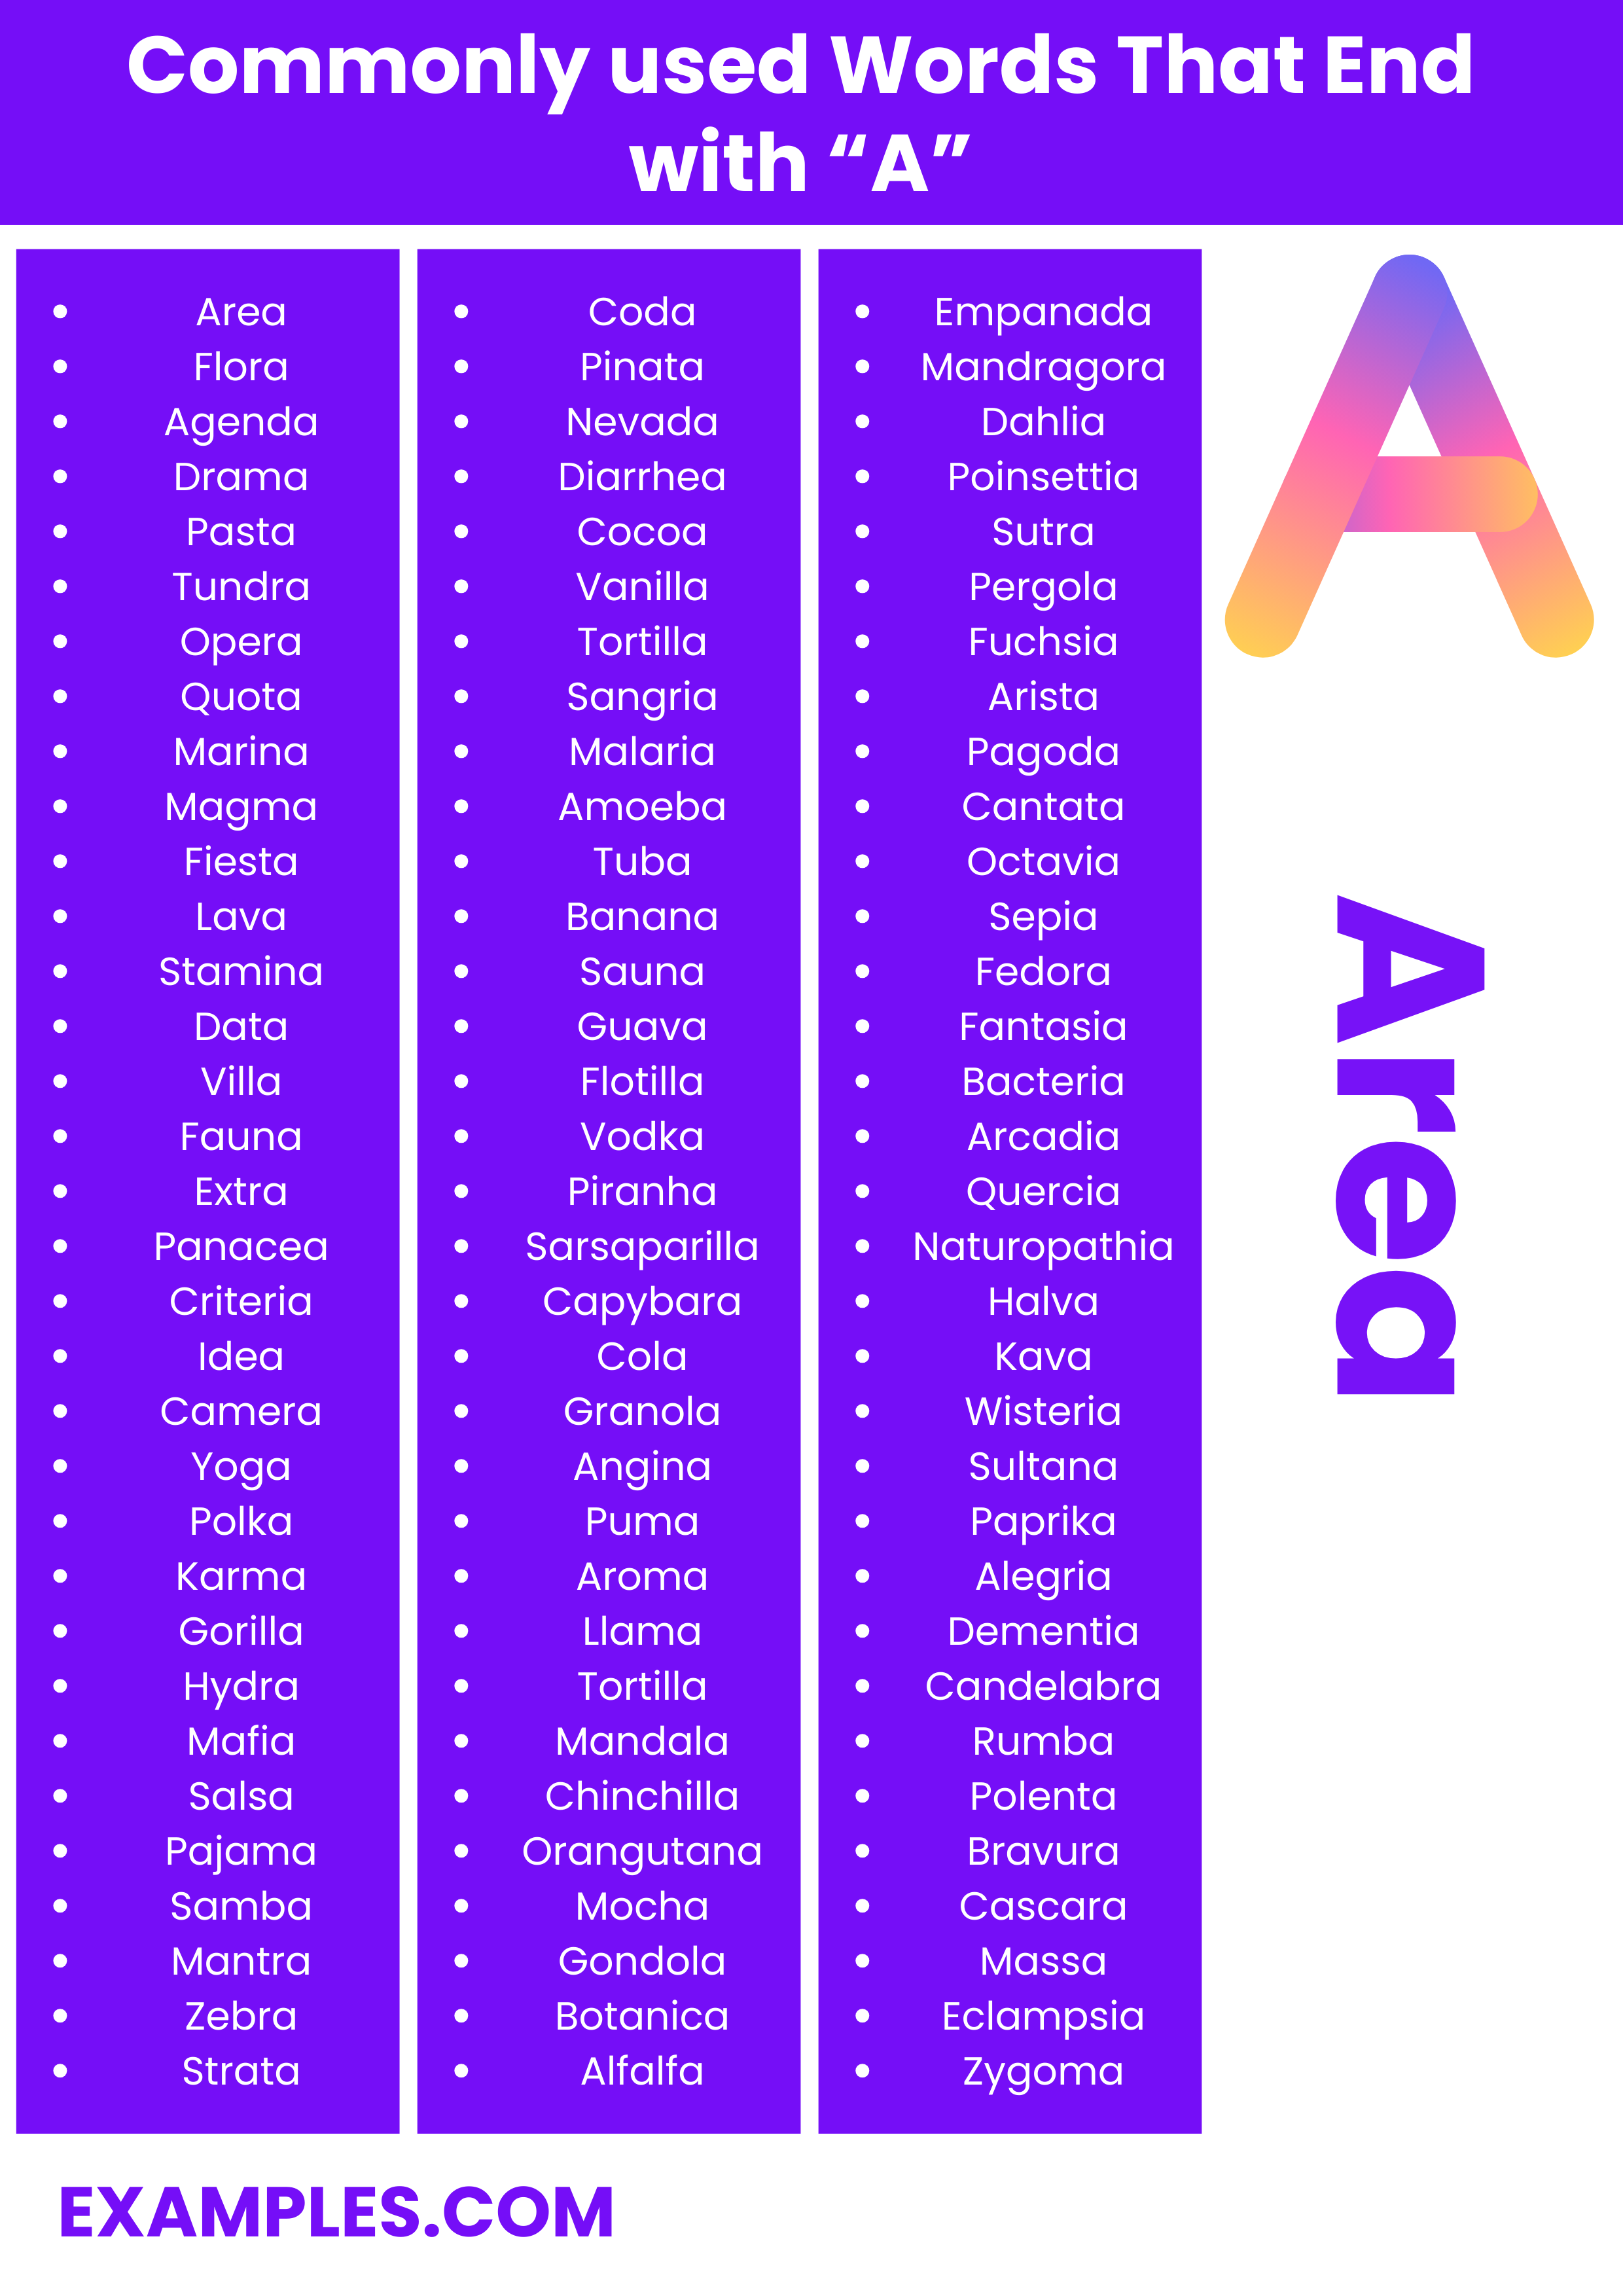 commonly used words that end with “a”